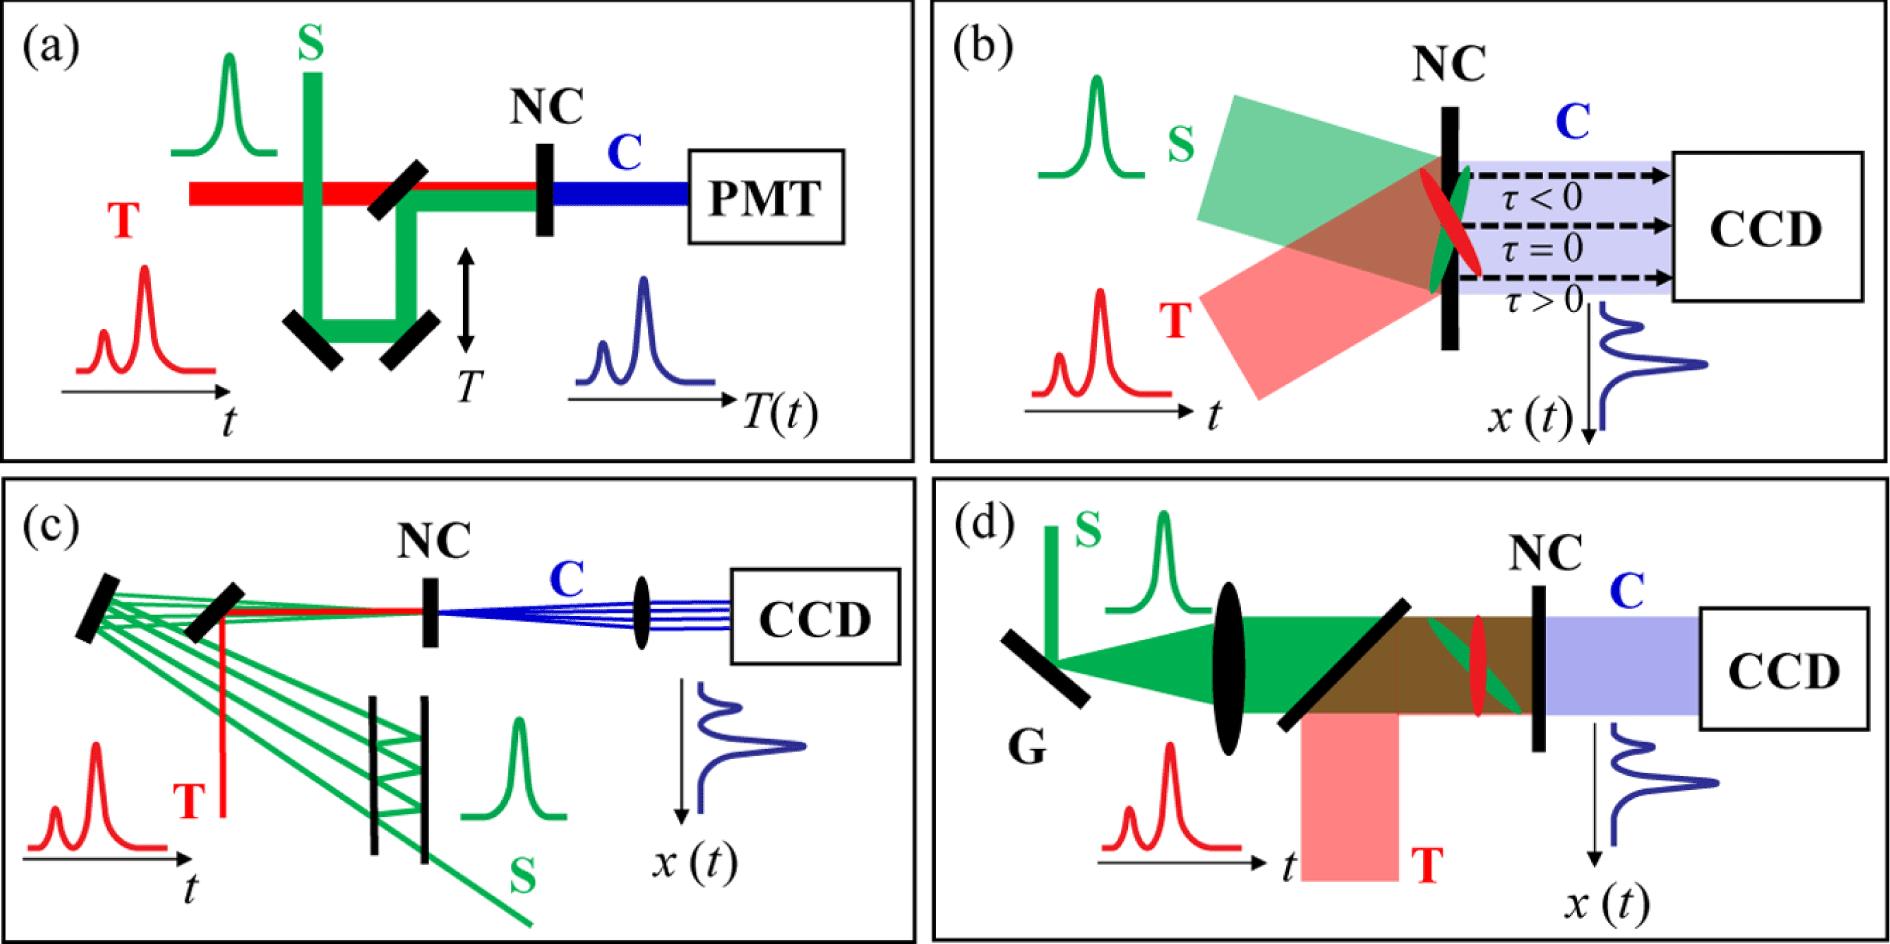 Schematic diagrams of DSCC and three versions of SSCC. (a) DSCC, in which the temporal window is determined by the delay-scanning line. (b) Noncollinear SSCC, in which the PT and sampling pulses are nonlinearly mixed in a noncollinear configuration. Its temporal window is determined by the noncollinear angle and beam width. (c) SSCC based on a pulse replicator, in which a sequence of spatially shifted and temporal delayed sampling pulses are created to nonlinearly mix with the PT pulse. It has a large temporal window ofand a temporal resolution of. (d) SSCC based on a diffraction grating, in which the tilted pulse front of sampling pulse maps the temporal intensity profile of PT pulse into the spatial intensity profile of generated correlation signal. Its temporal window is determined by the tilting angle of sampling pulse front and the beam width. T, PT pulse; S, sampling pulse; C, correlation signal; NC, nonlinear crystal;, time delay of S relative to T.